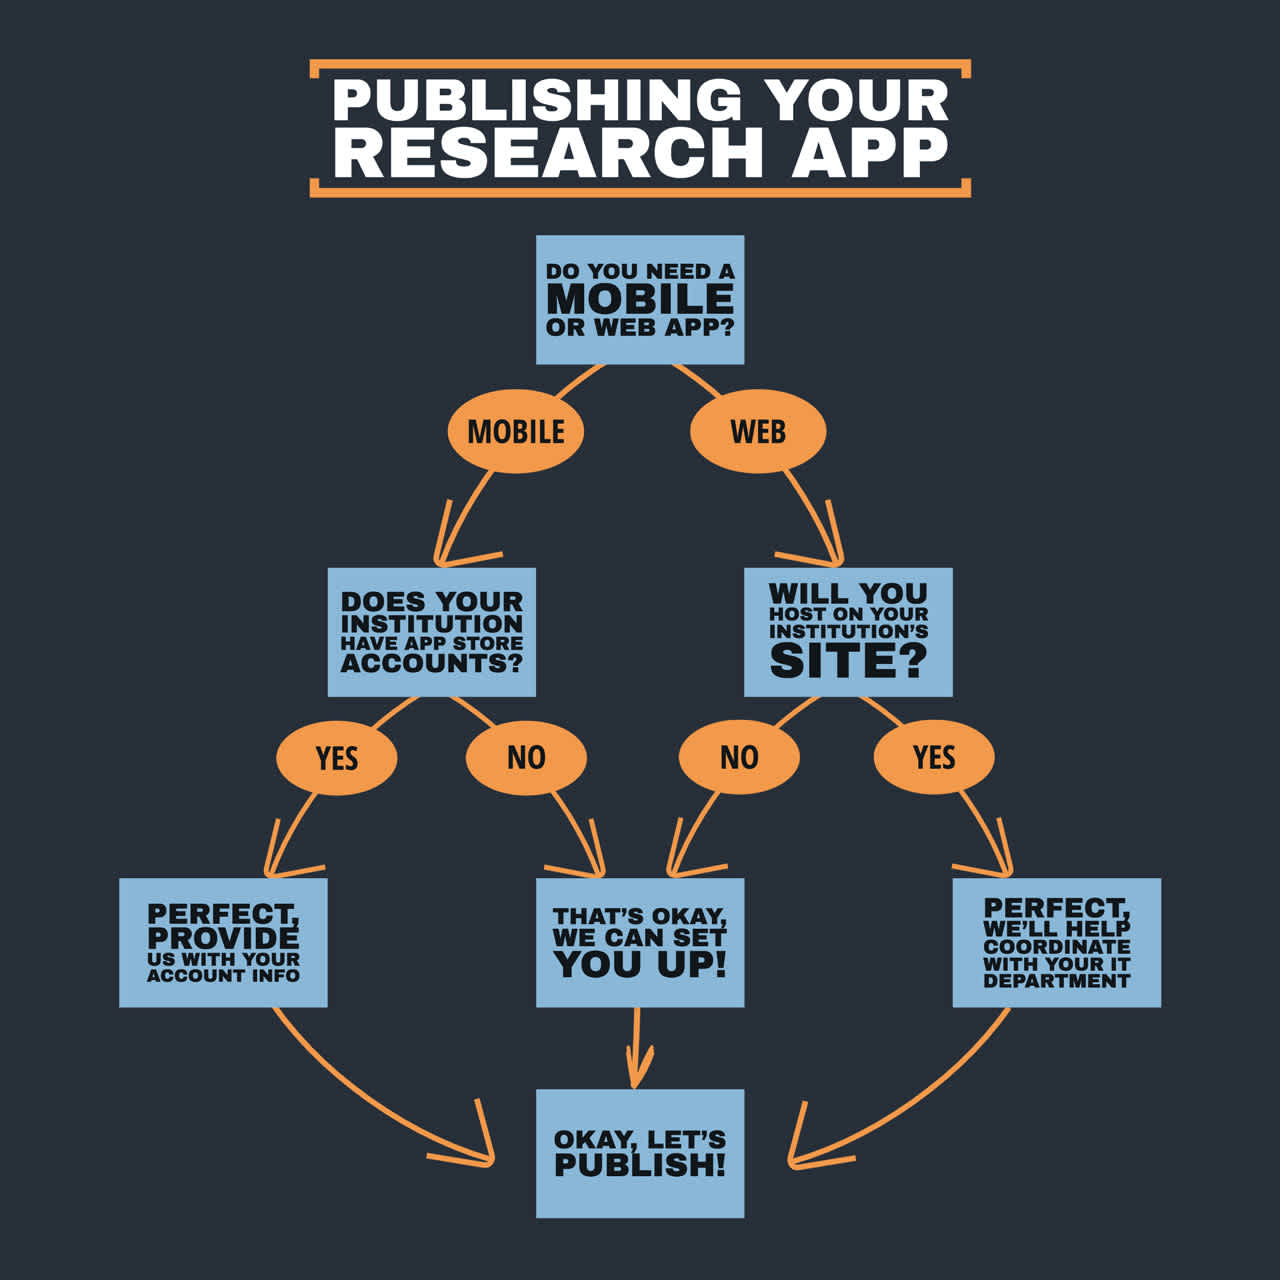 Publishing your research app flow chart